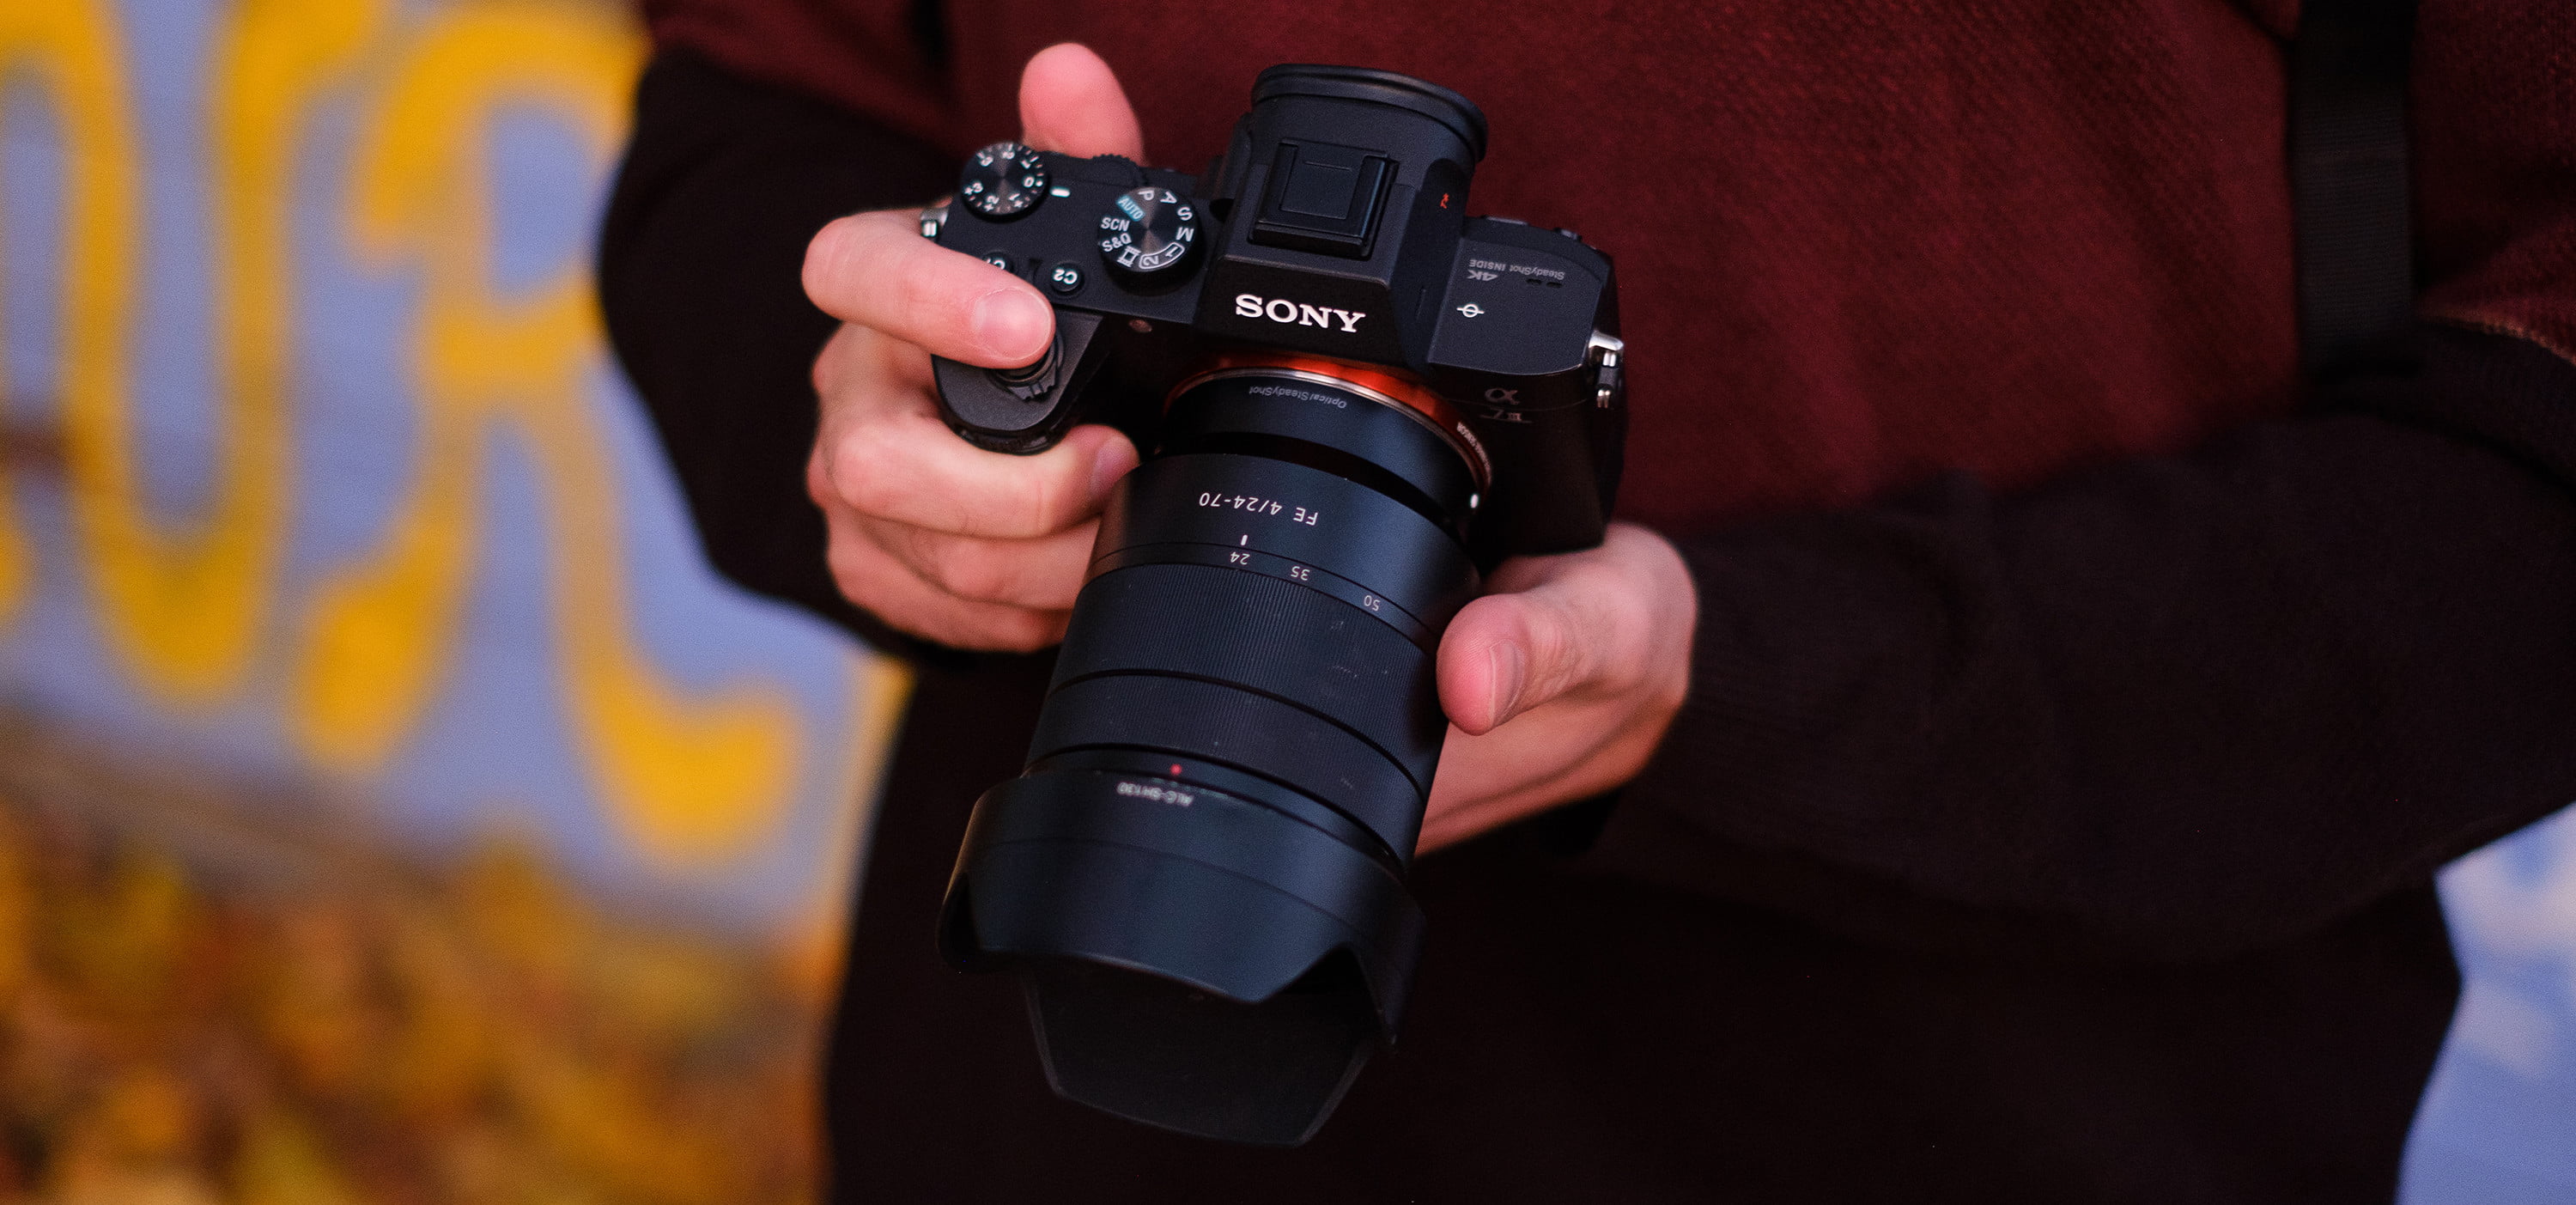 Sony a7 manual download video